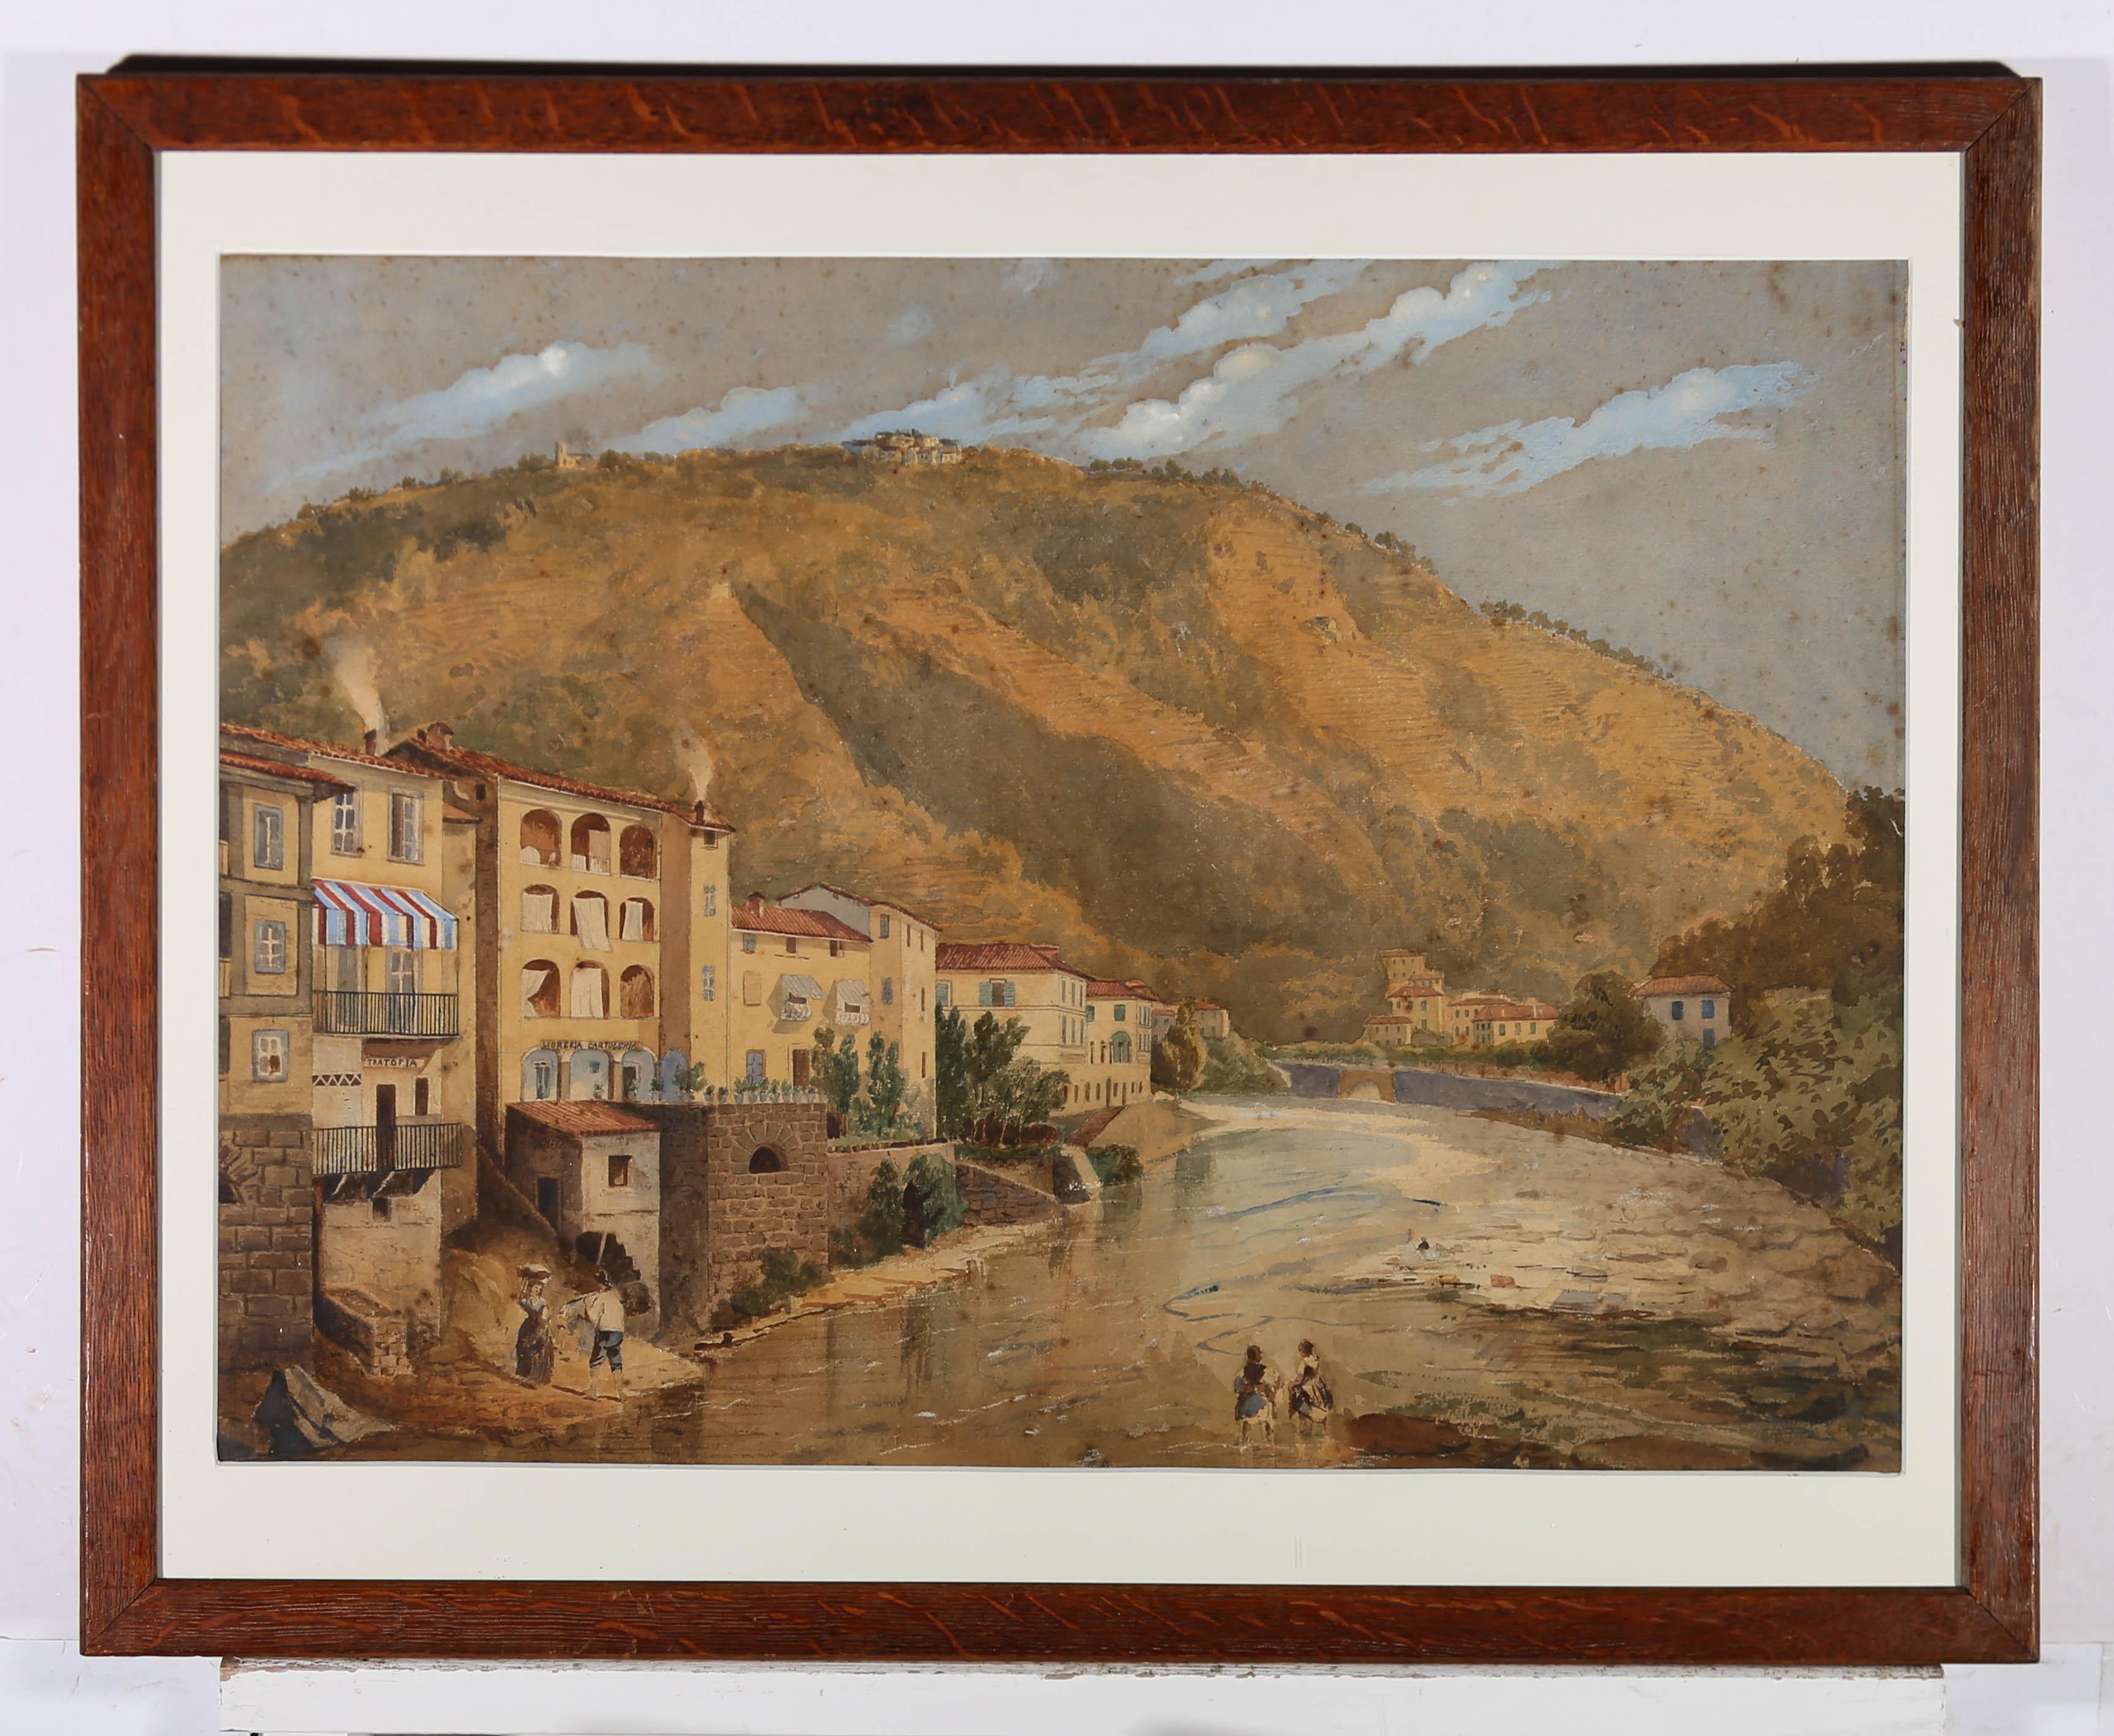 A delightful watercolour landscape of a Mediterranean village positioned next to a large hillside, with figures. Unsigned. Presented in a wooden frame, with white card mount. Glazed. On watercolour paper.
